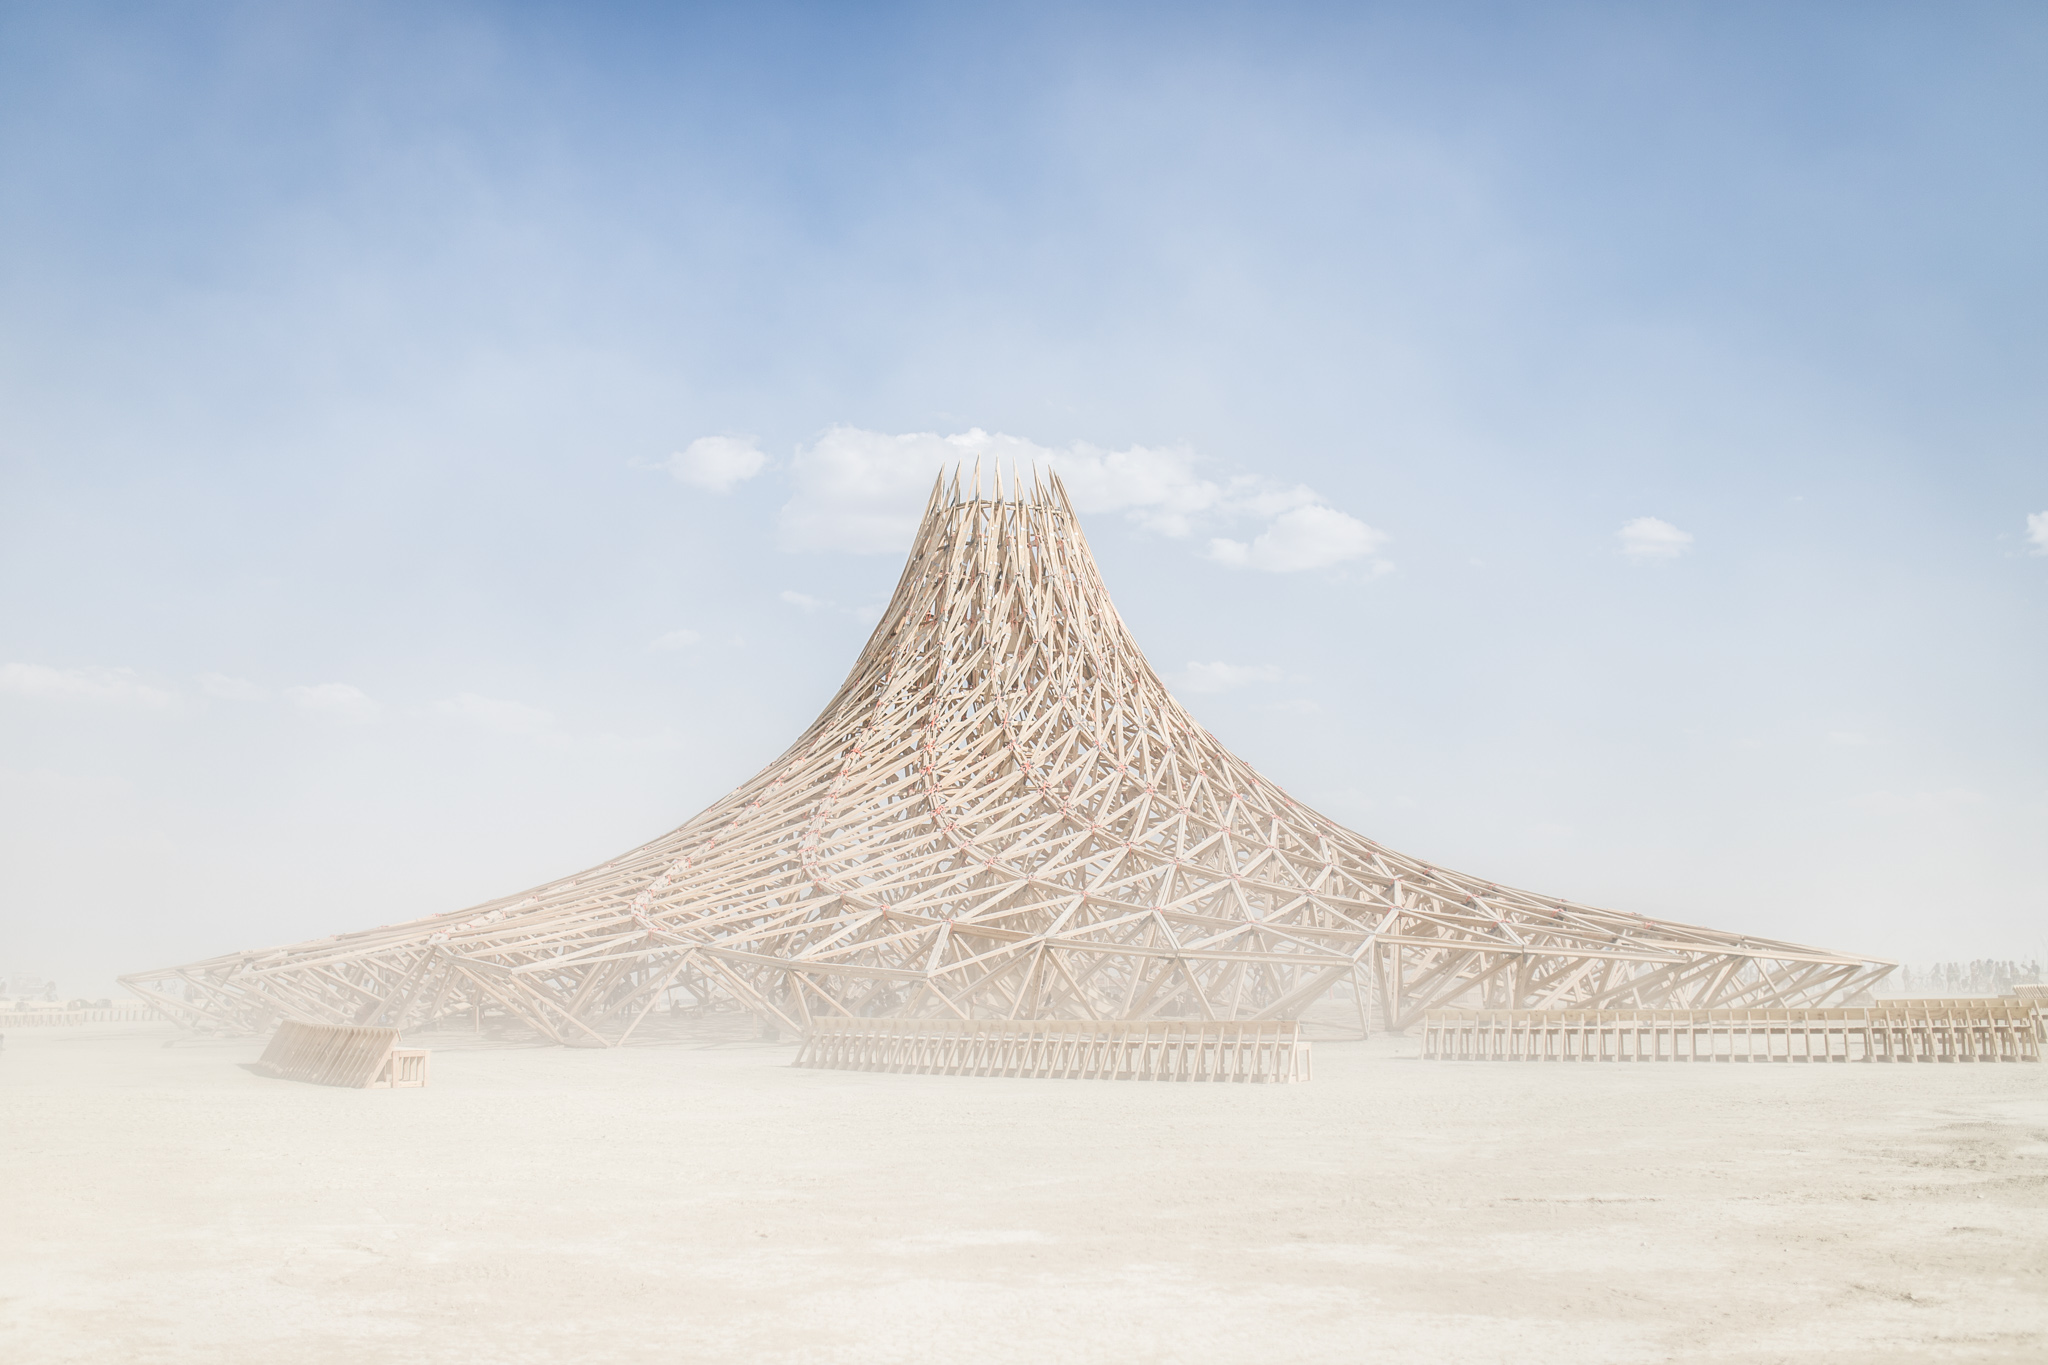 The Temple Where Burning Man’s soul goes up in flames